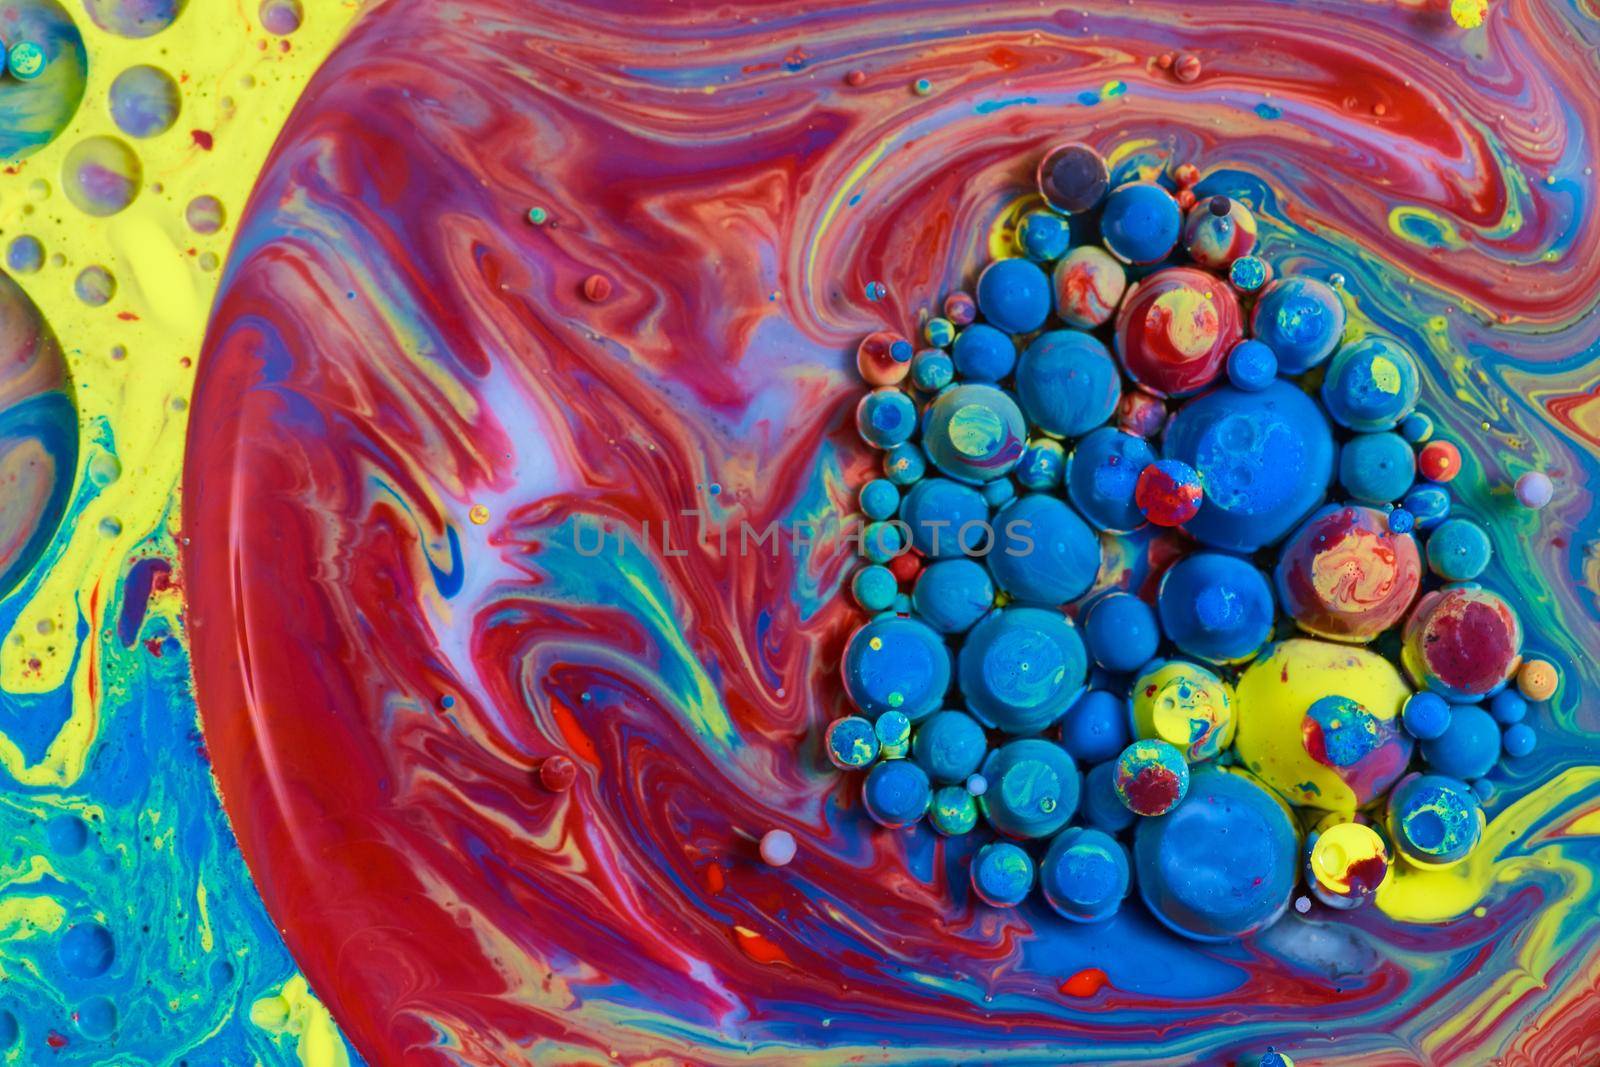 Image of Rainbow circular silky surface with cluster of colorful acrylic orbs